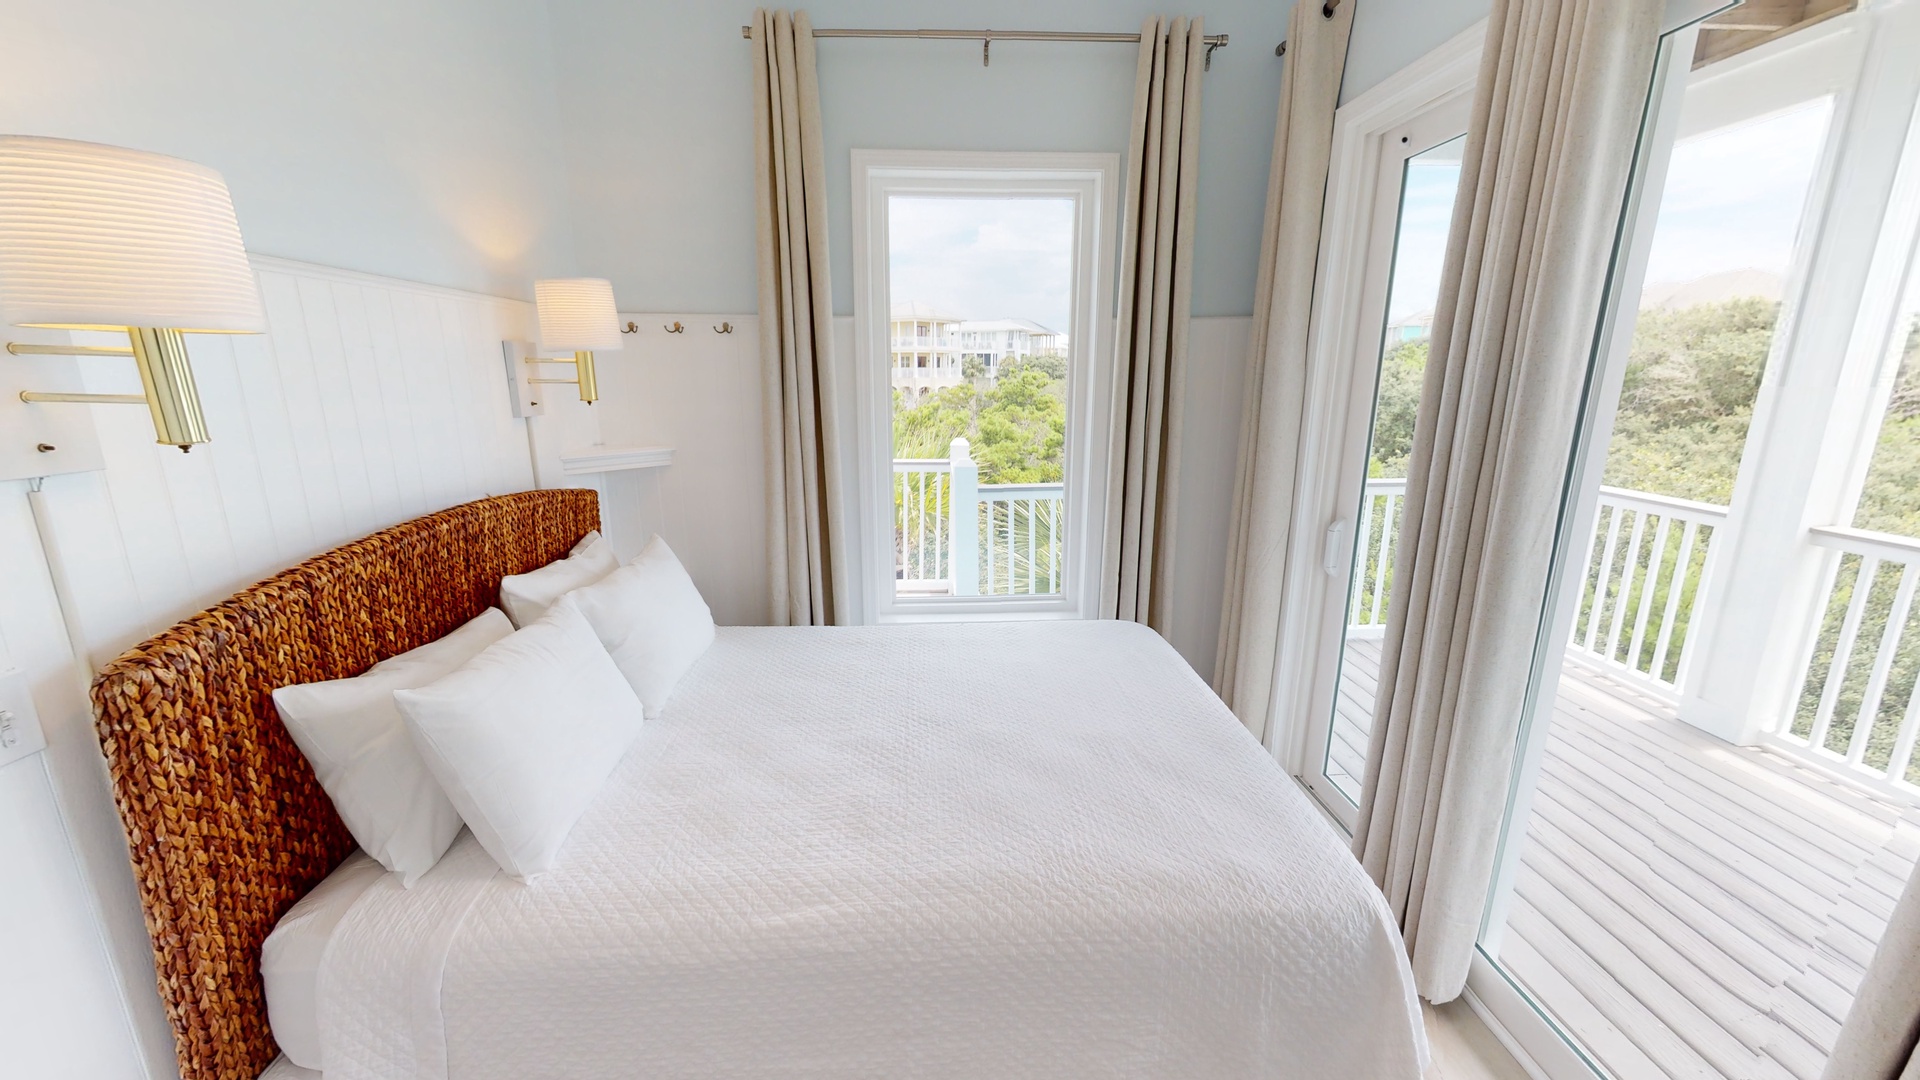 Little-Blue-Bedroom 2 is on the 2nd floor with a queen bed, TV, ceiling fan and balcony access